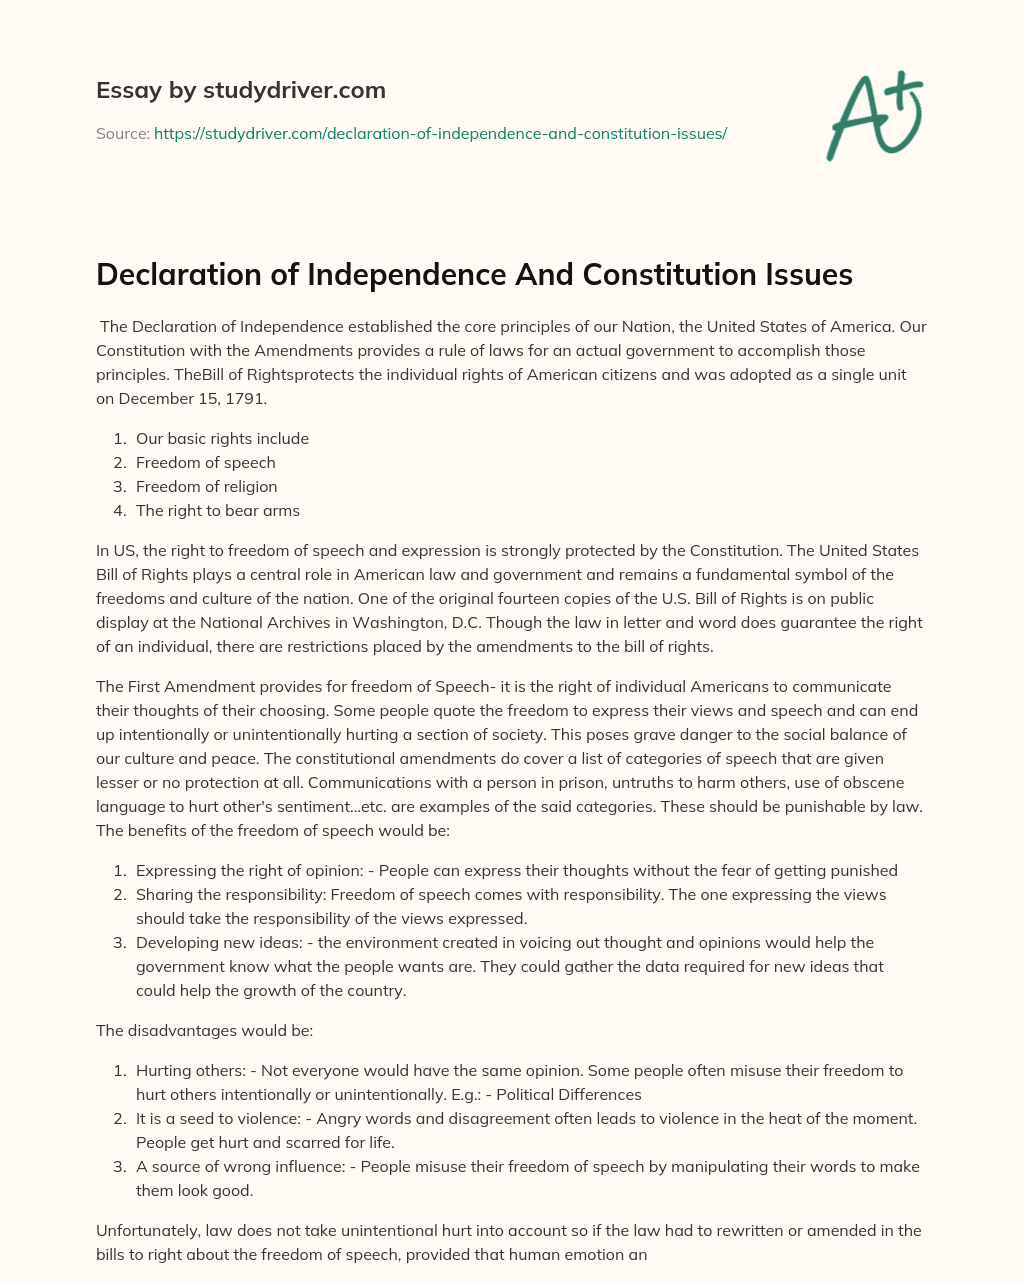 Declaration of Independence and Constitution Issues essay